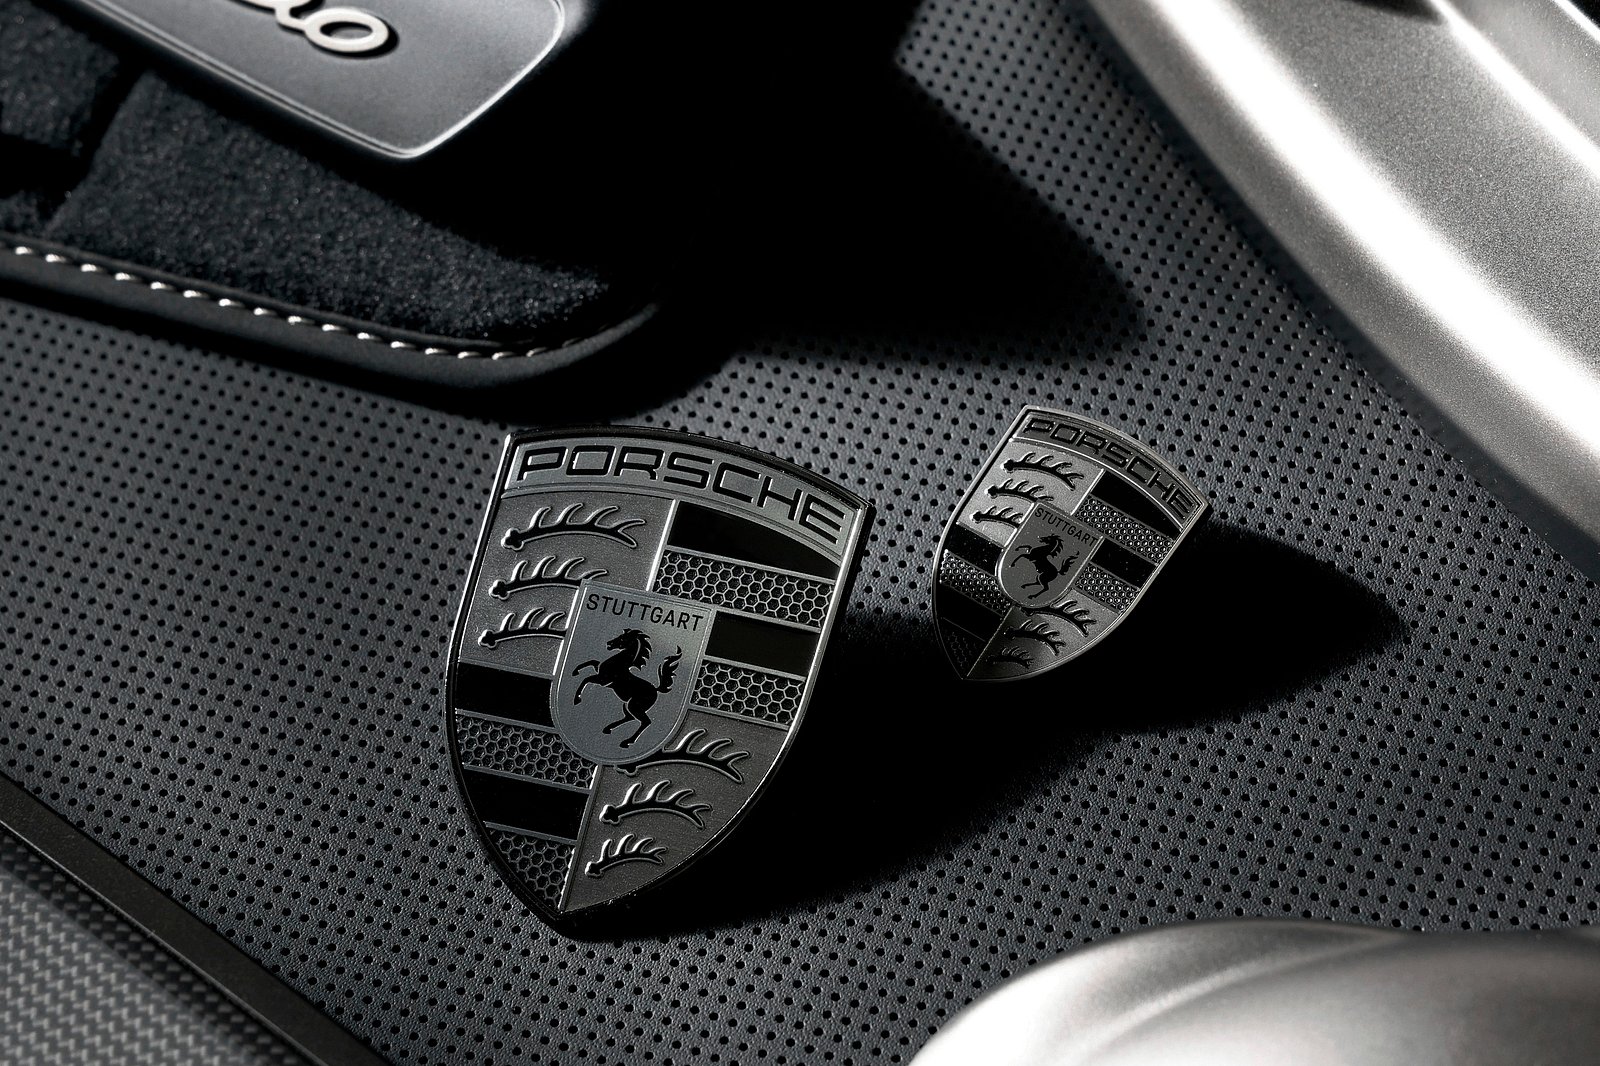 photo of Porsche Introduces New Turbonite Crest To Make Turbo Models Even More Special image